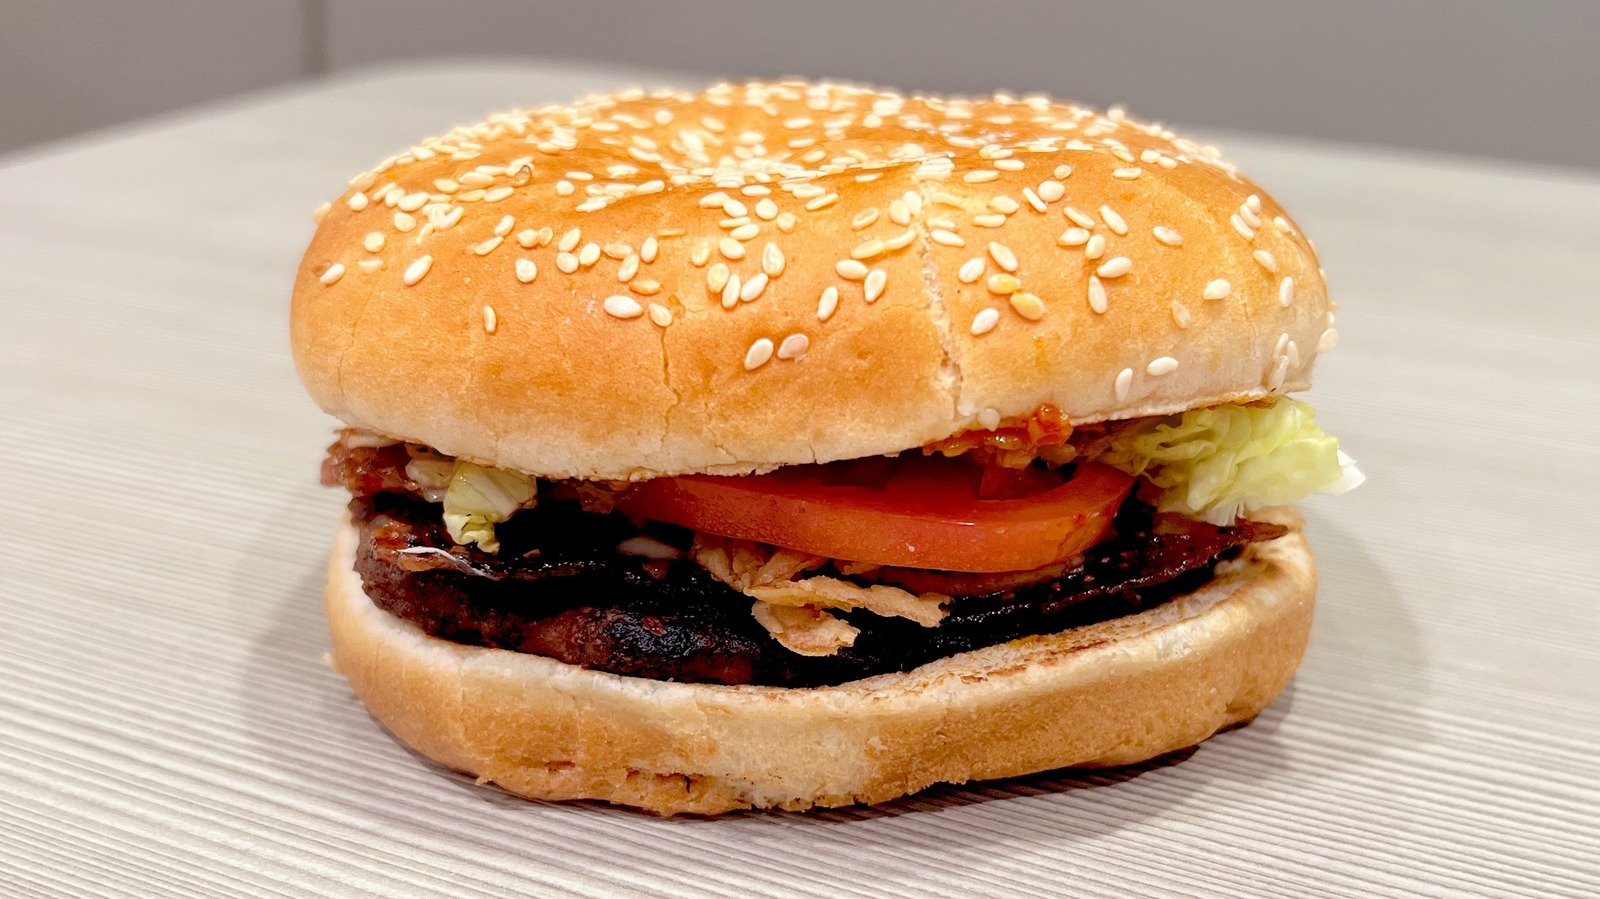 We Tried Burger King's Candied Bacon Whopper And It's Just Not Our Jam